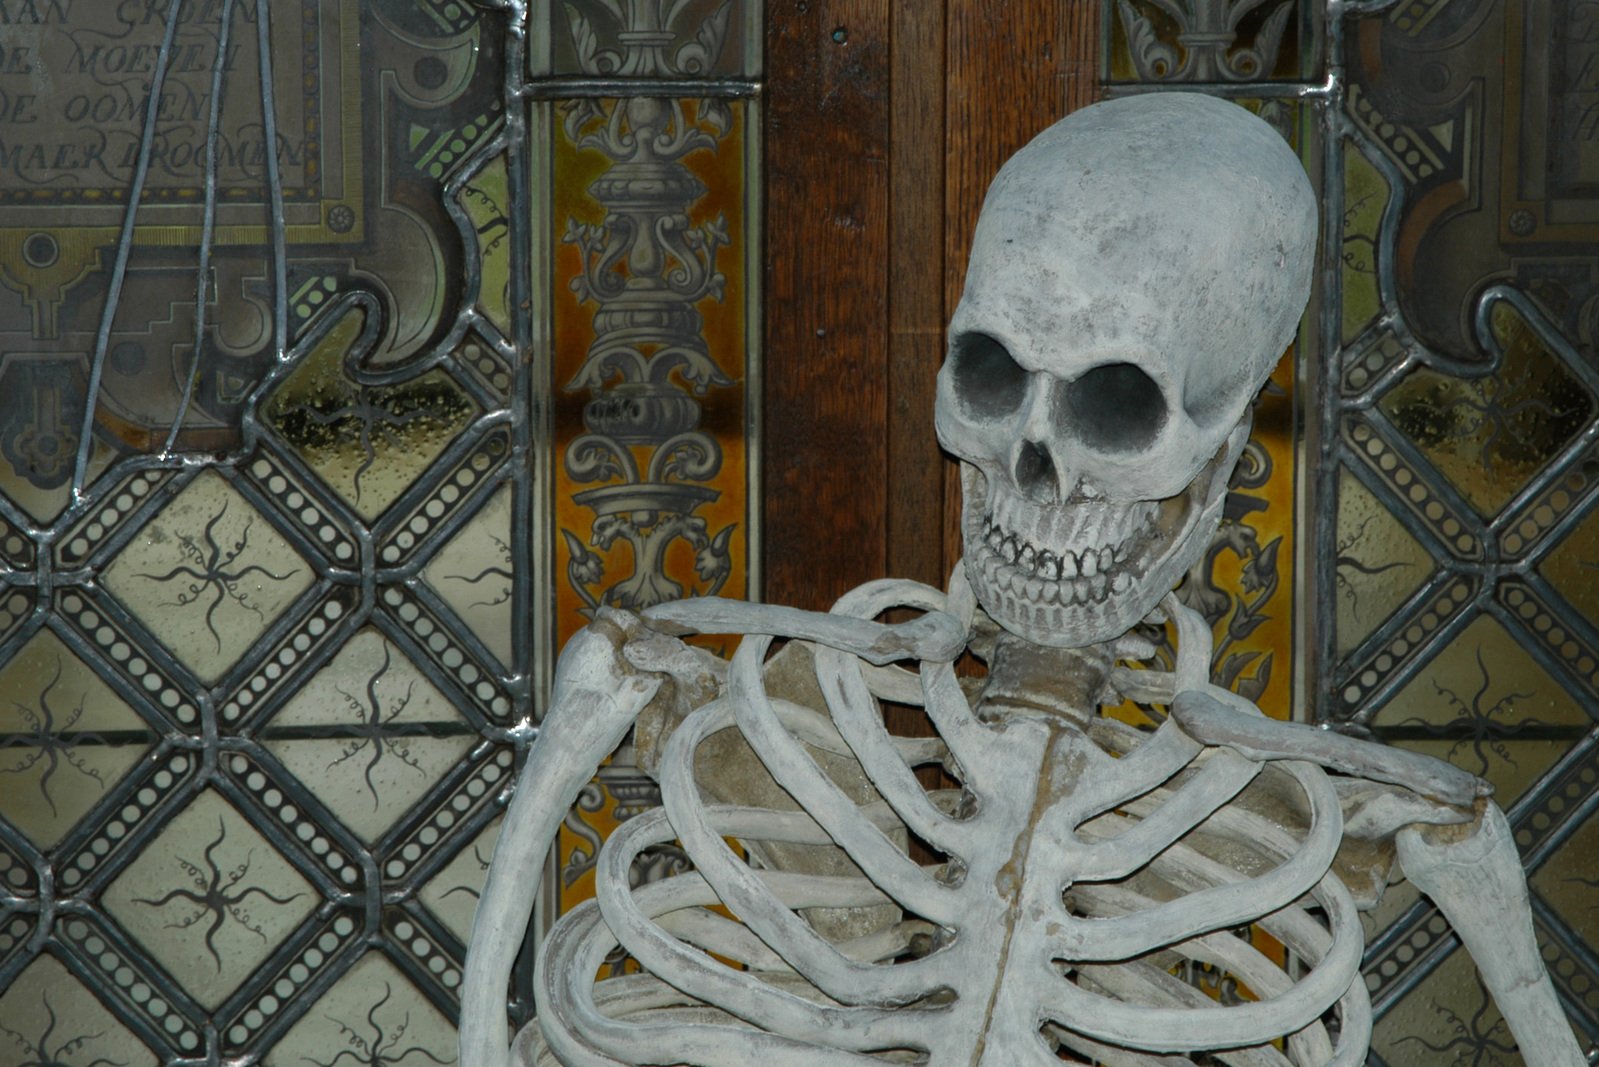 a skeleton on display in a front door of a house